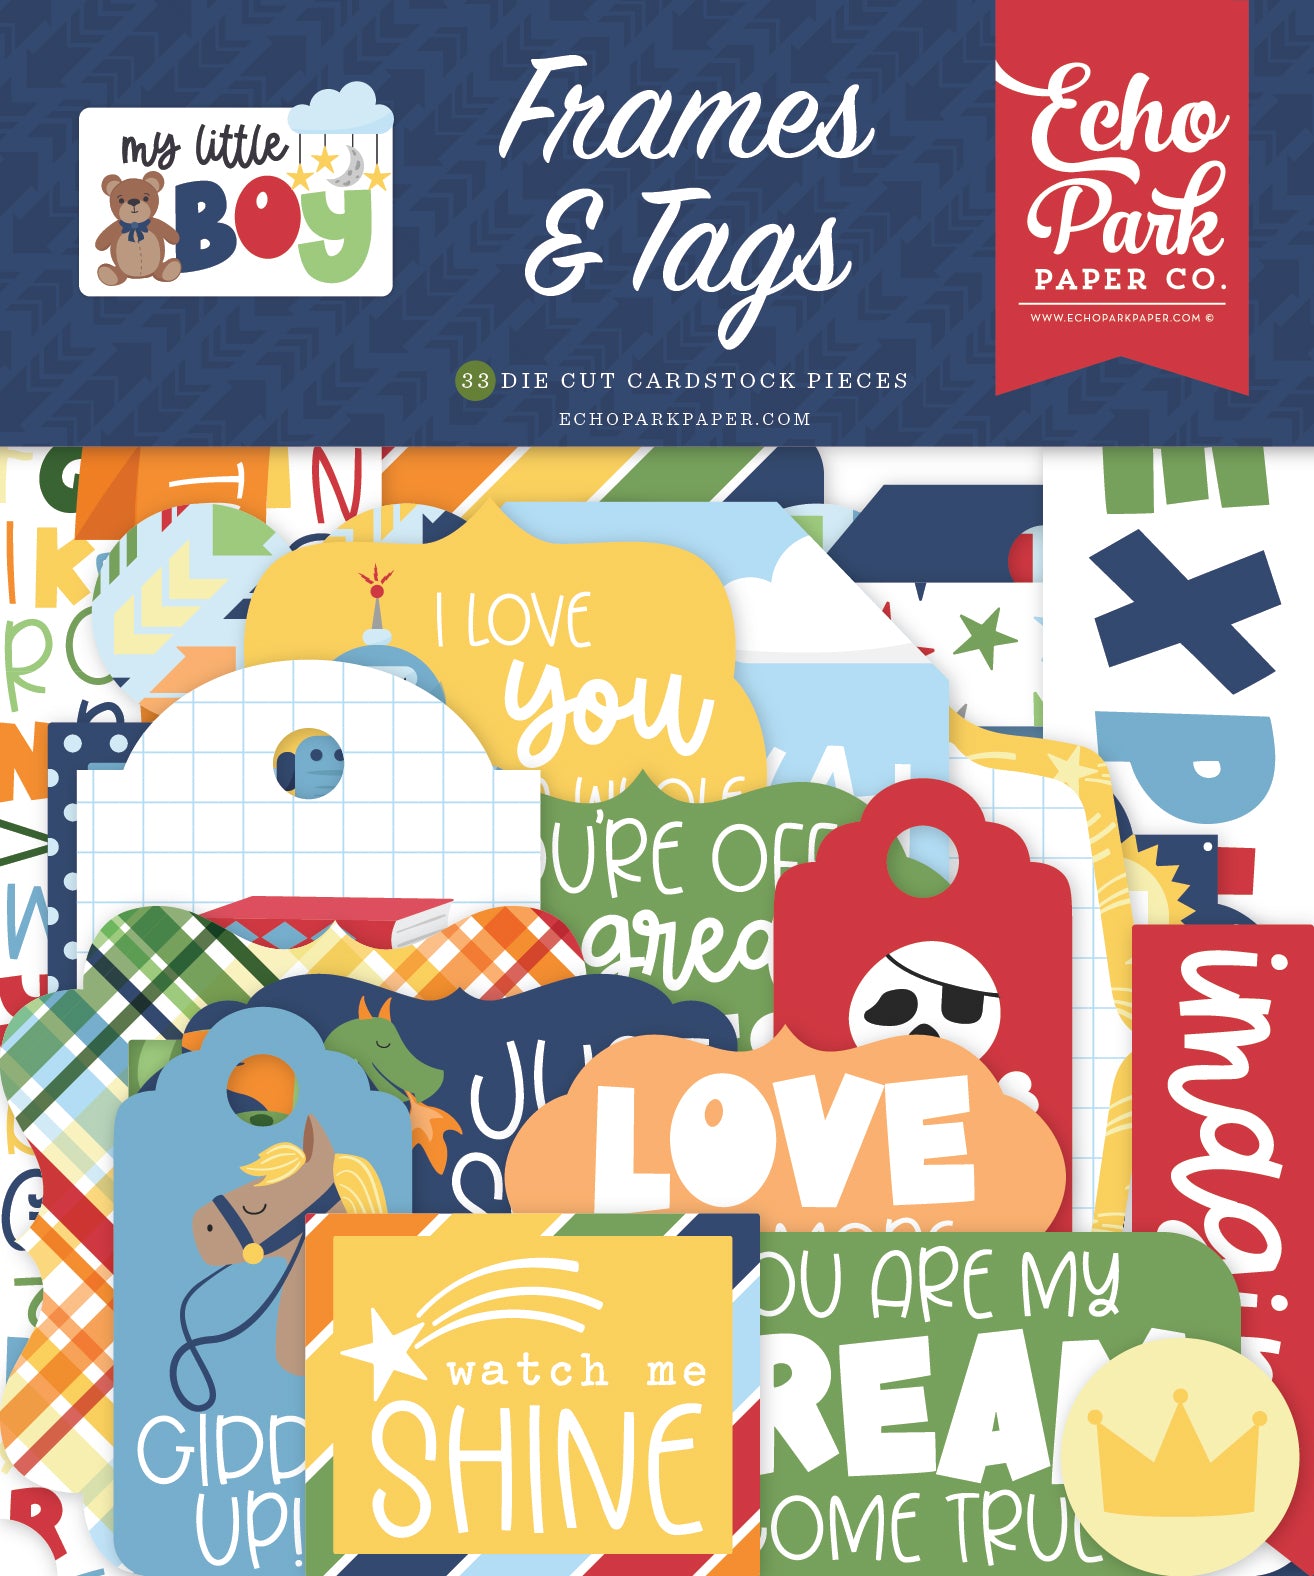 My Little Boy Collection Scrapbook Frames & Tags by Echo Park Paper